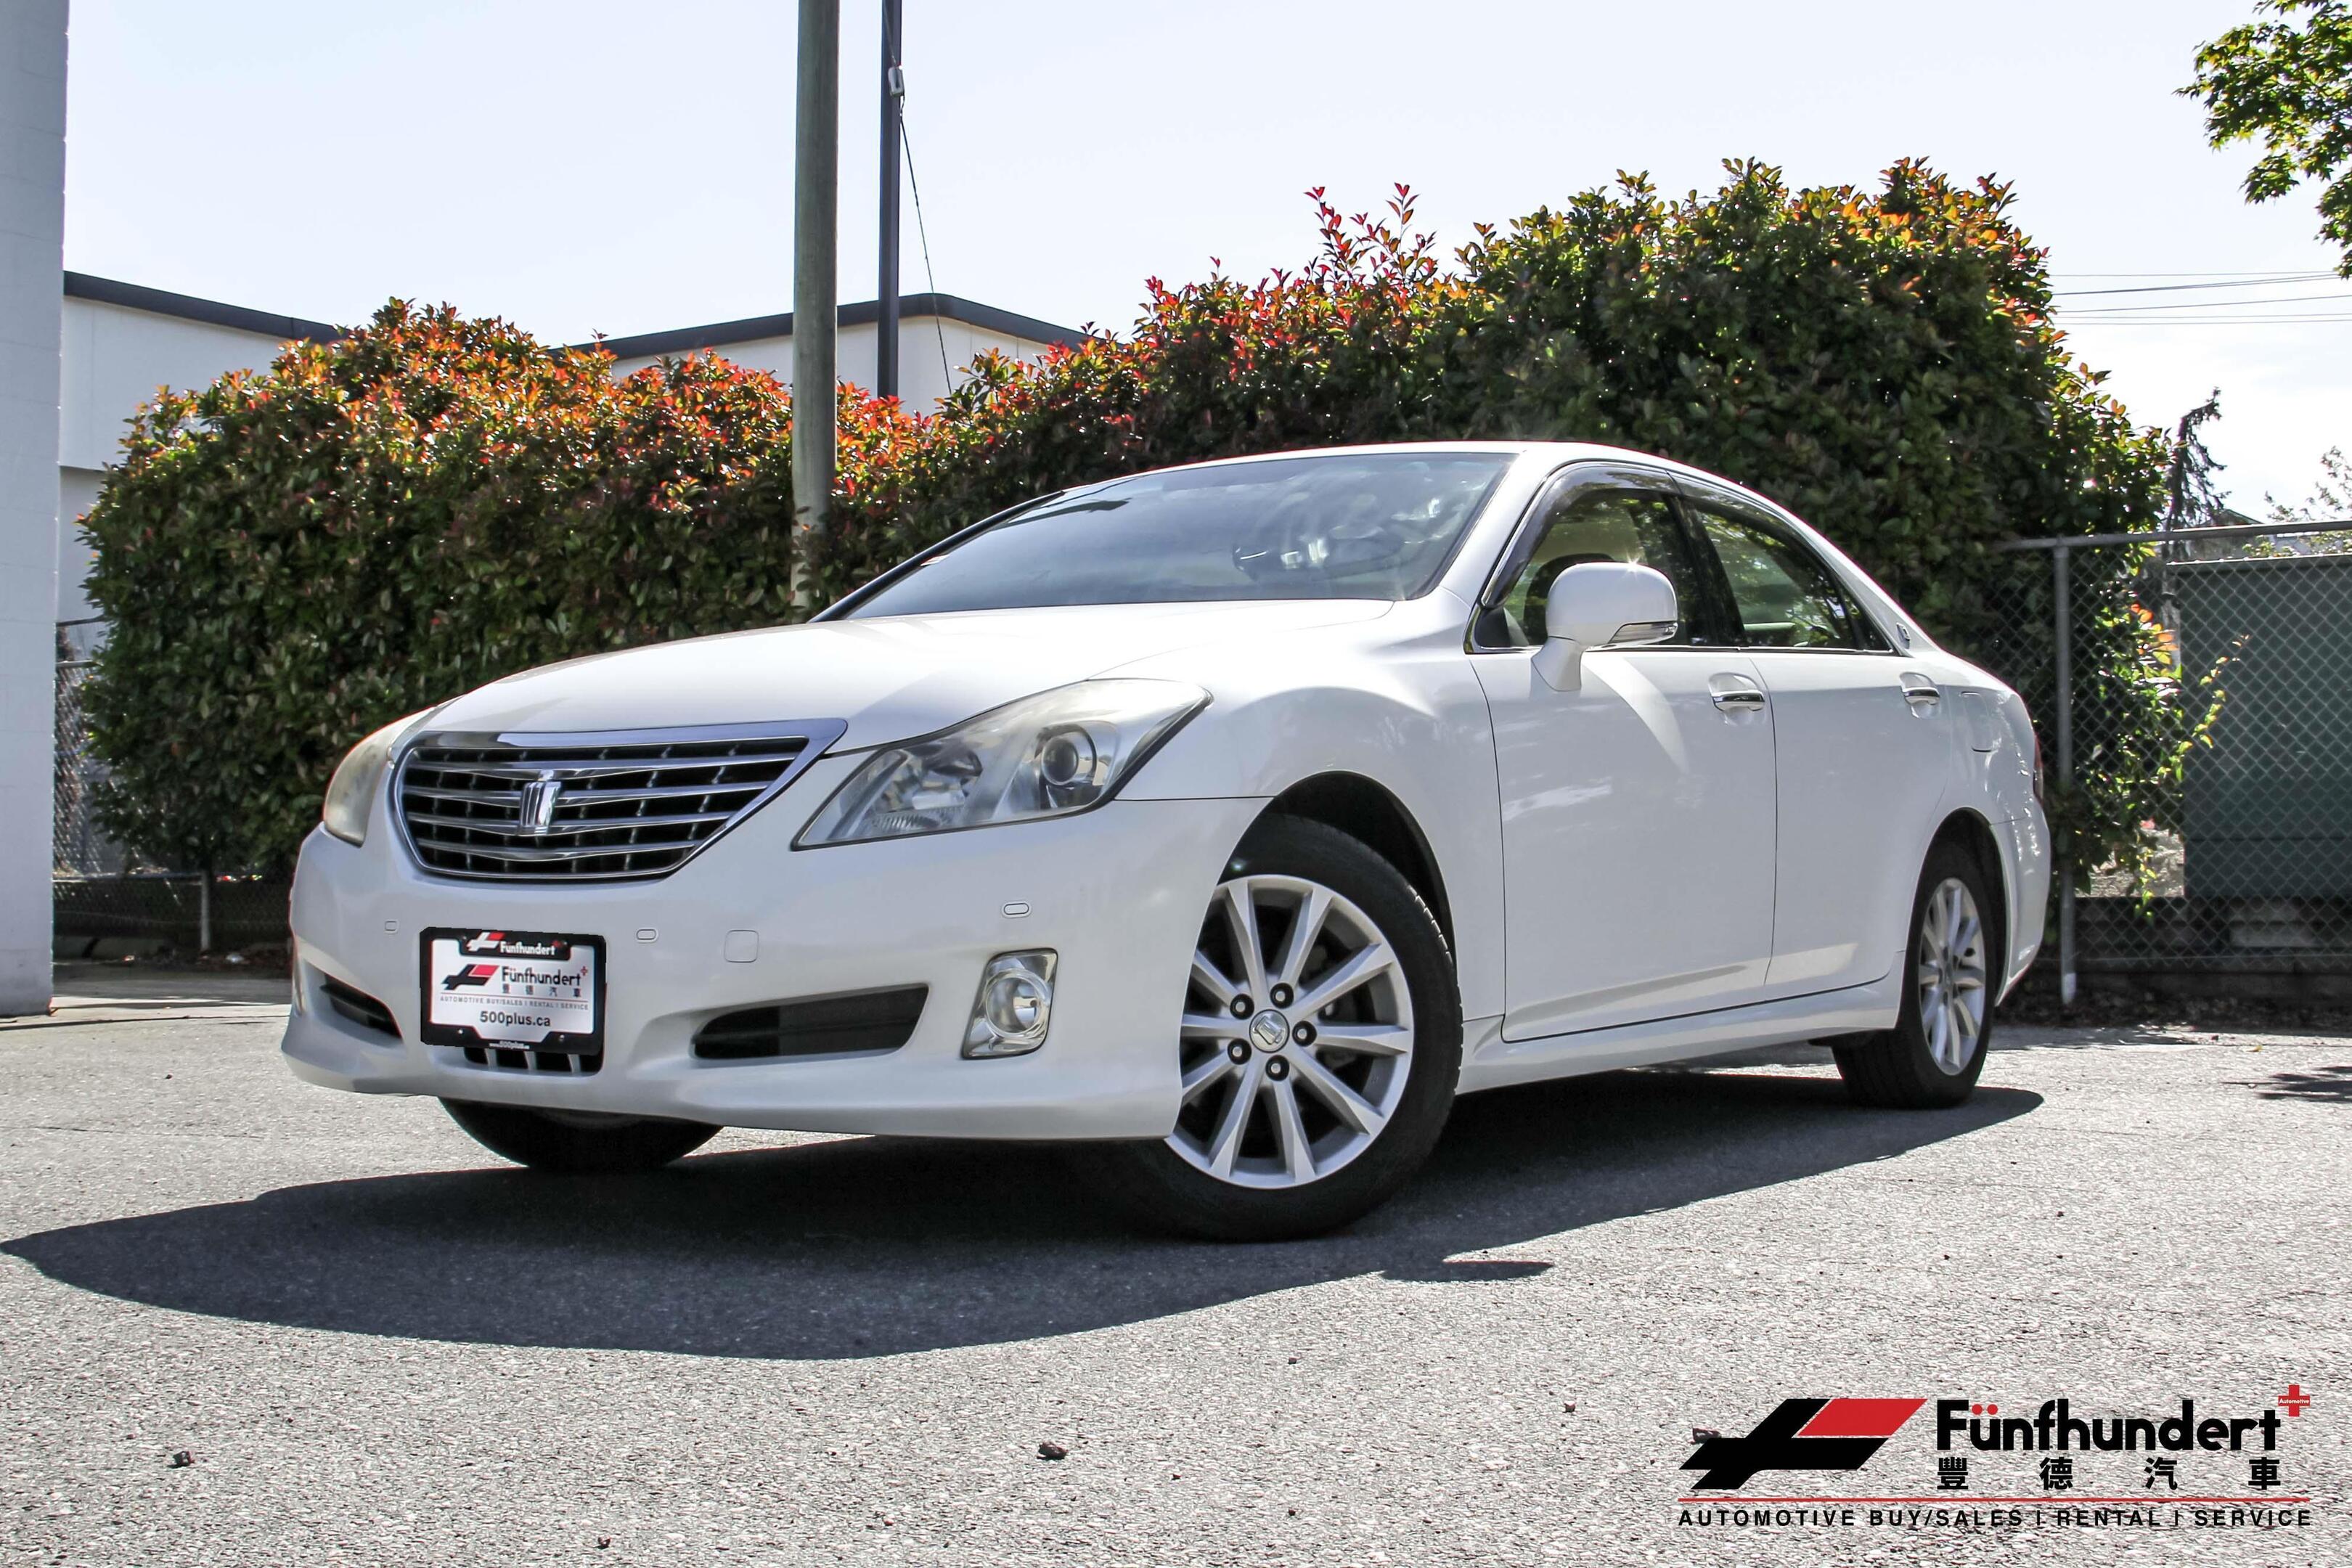 2009 Toyota Crown 2.5L/Only 49,334 Kms/RWD/Super Good Condition